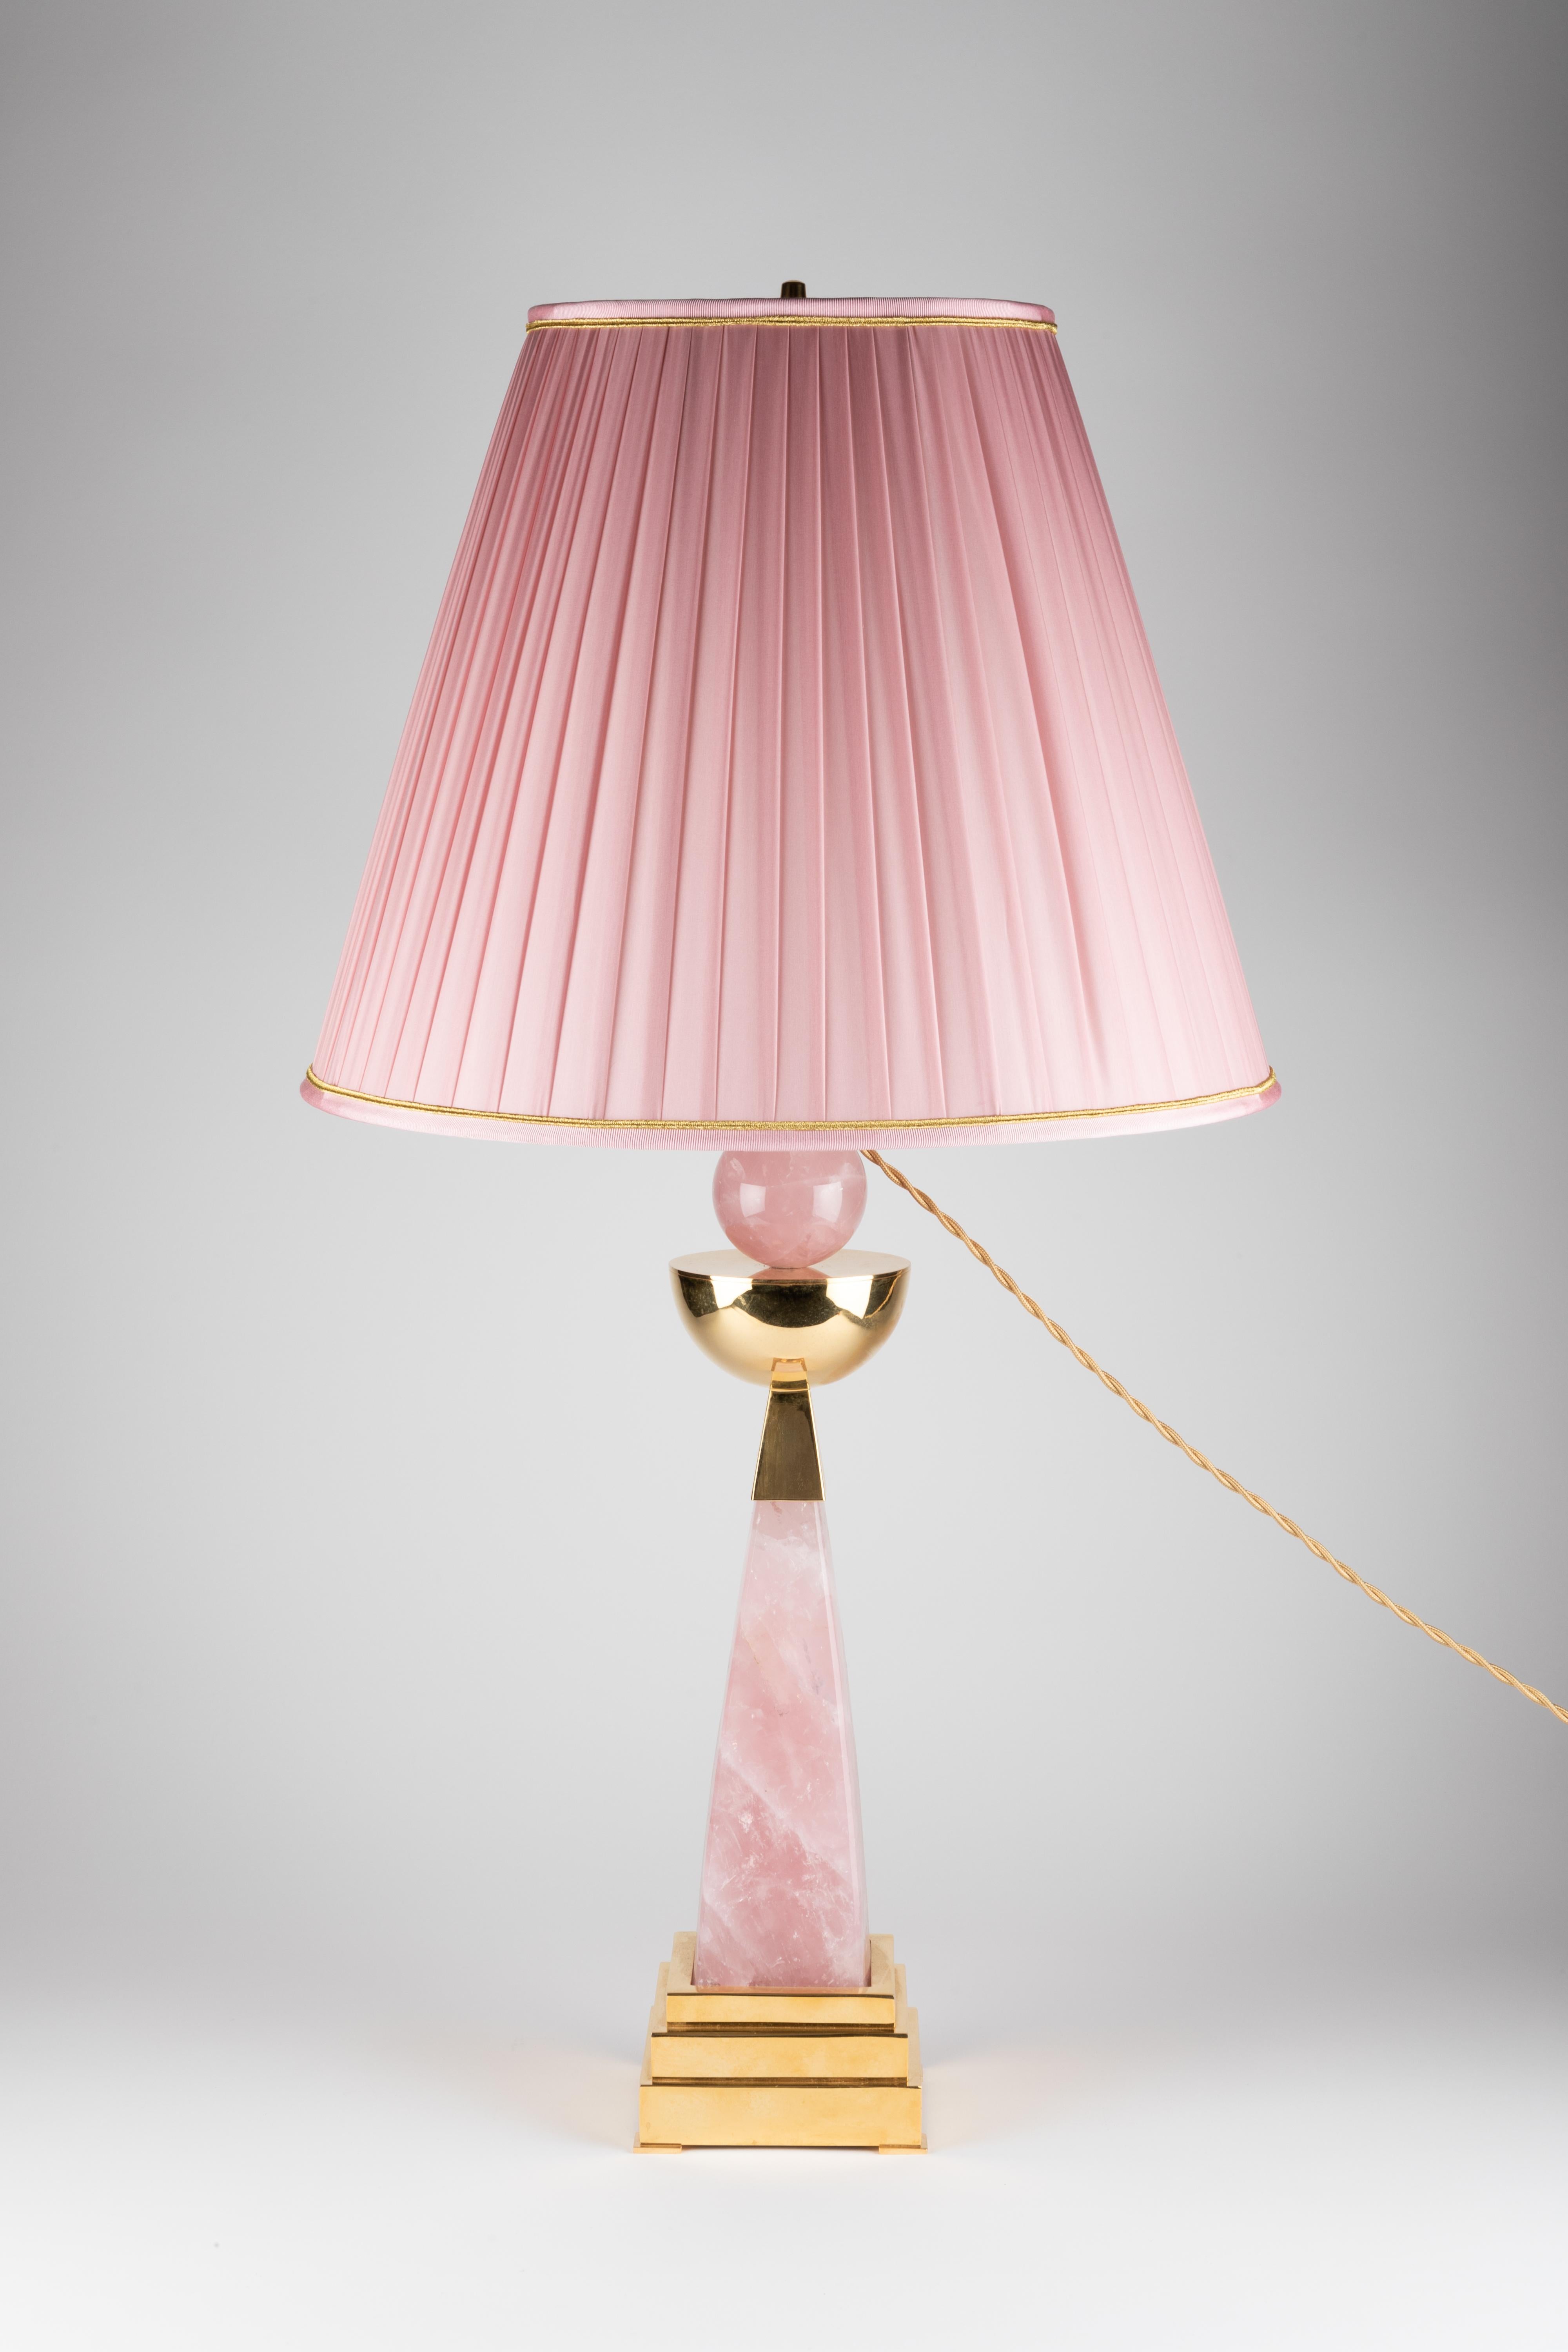 Rose Quartz Aiko I Model By Alexandre VOSSION In New Condition For Sale In SAINT-OUEN, FR